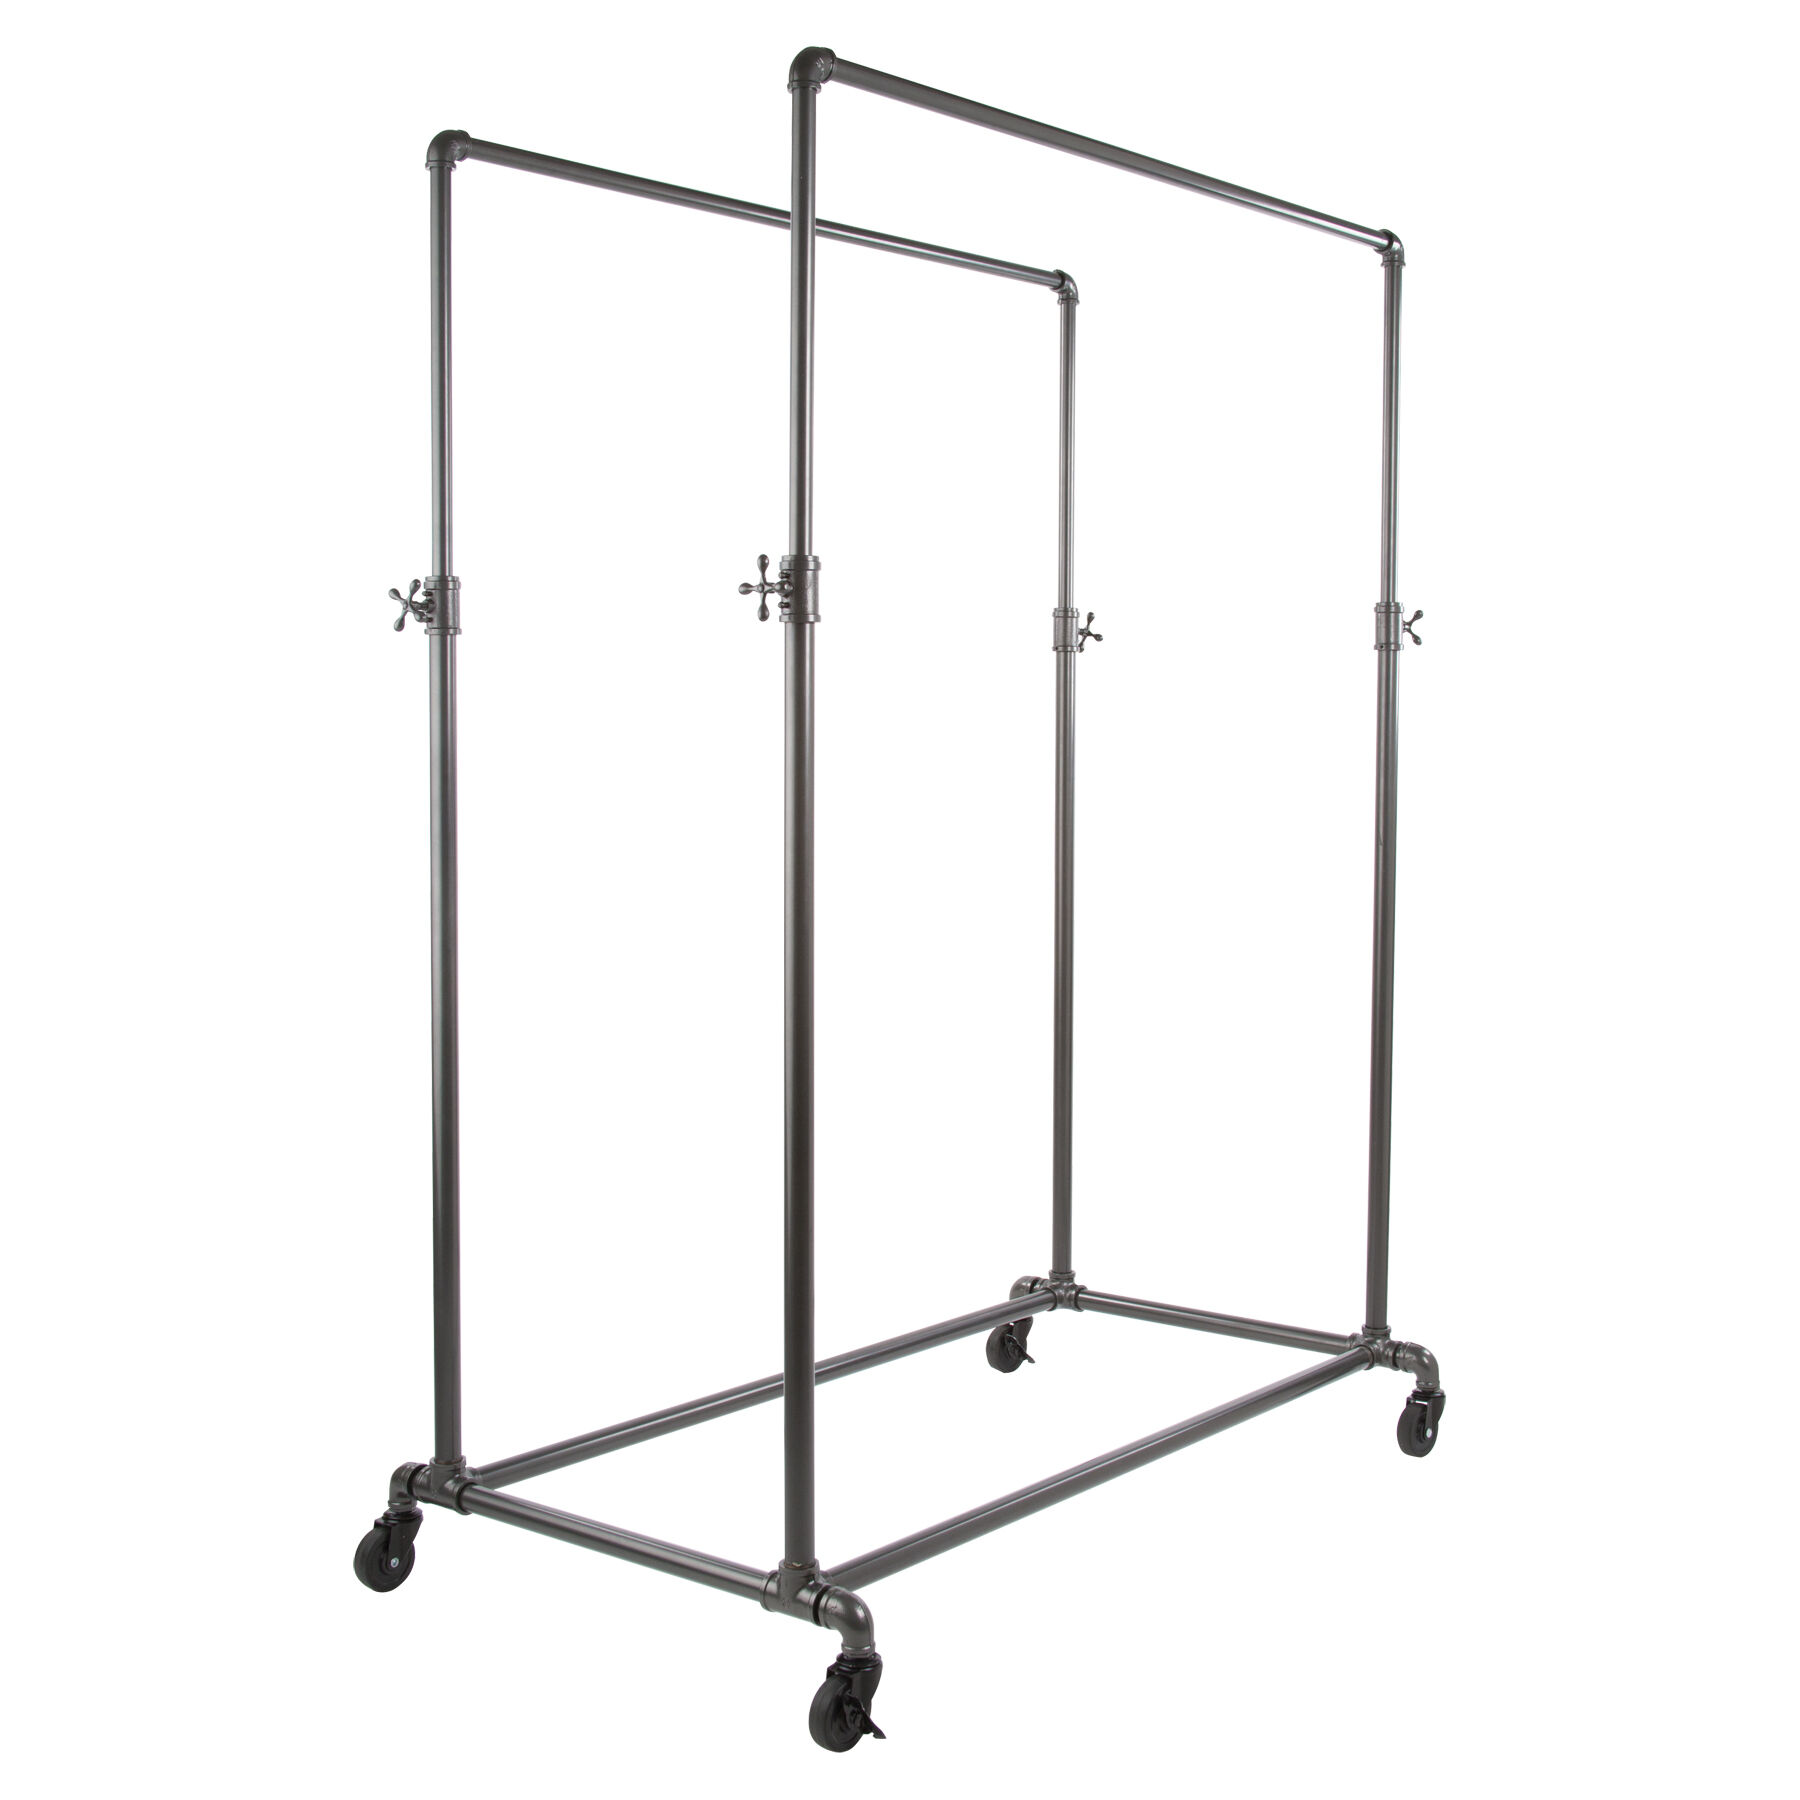 Anthracite Grey frame. Adjusts from 50" - 78".Base: 50"W x 29"D.Constructed of heavy duty 1¼" diameter plumbing pipe in anthracite grey or gloss white finish. A set of four 3" casters, 2 locking, 2 non-locking are included.  